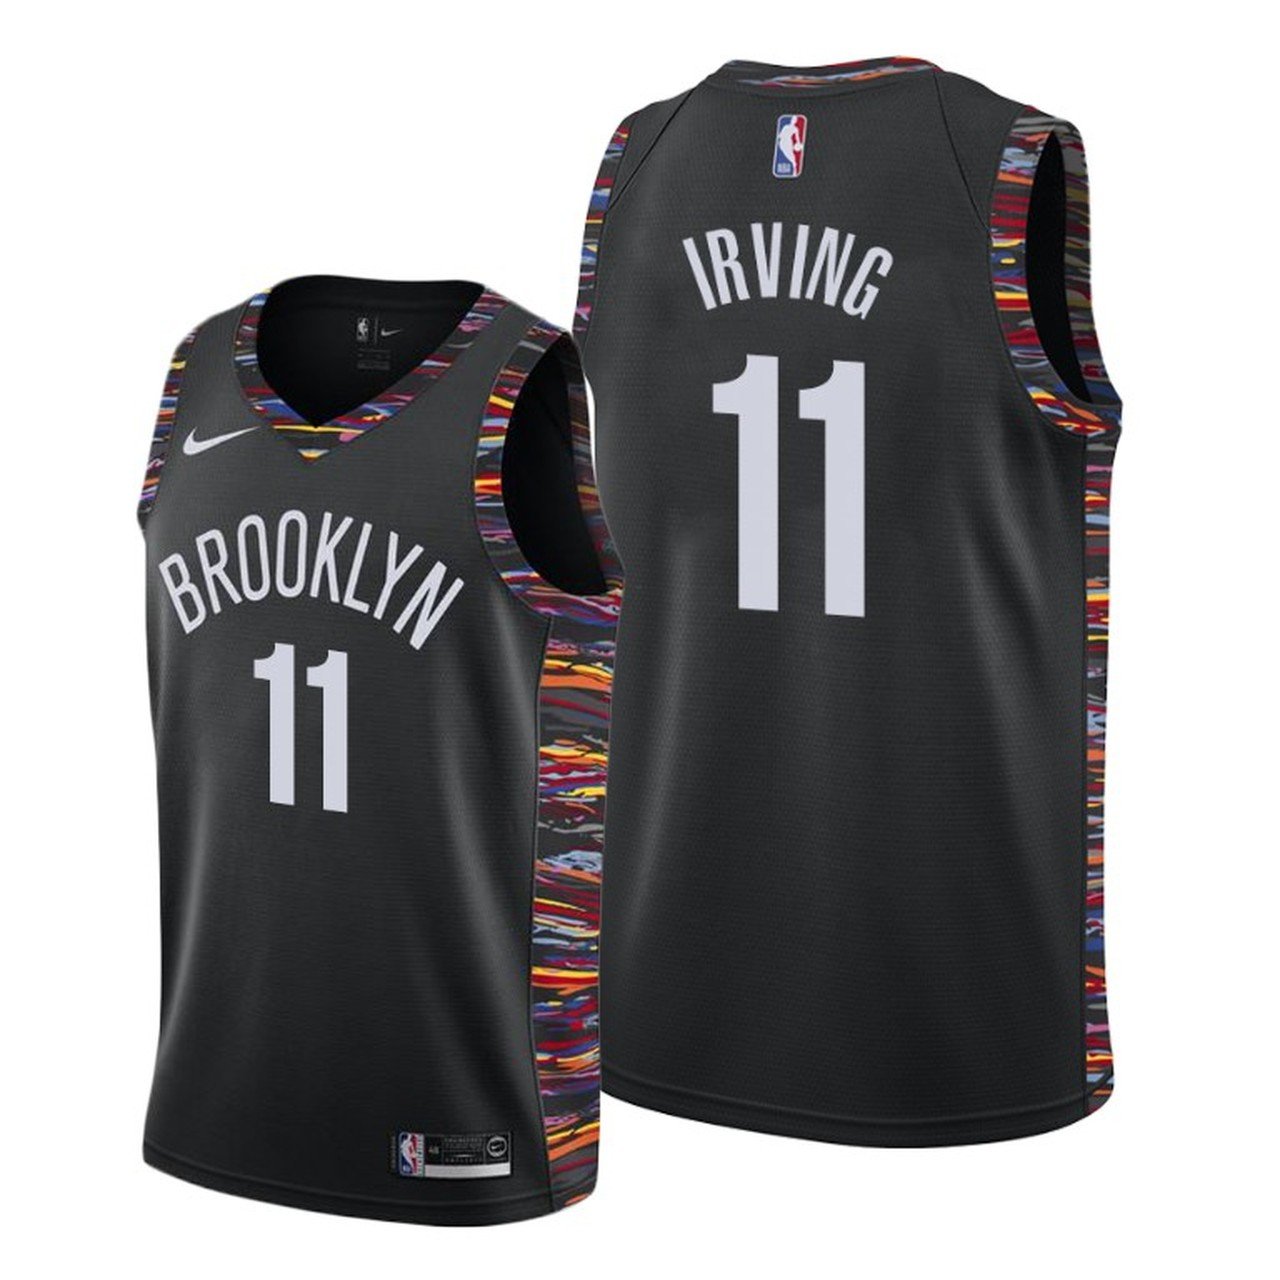 kyrie irving stitched jersey